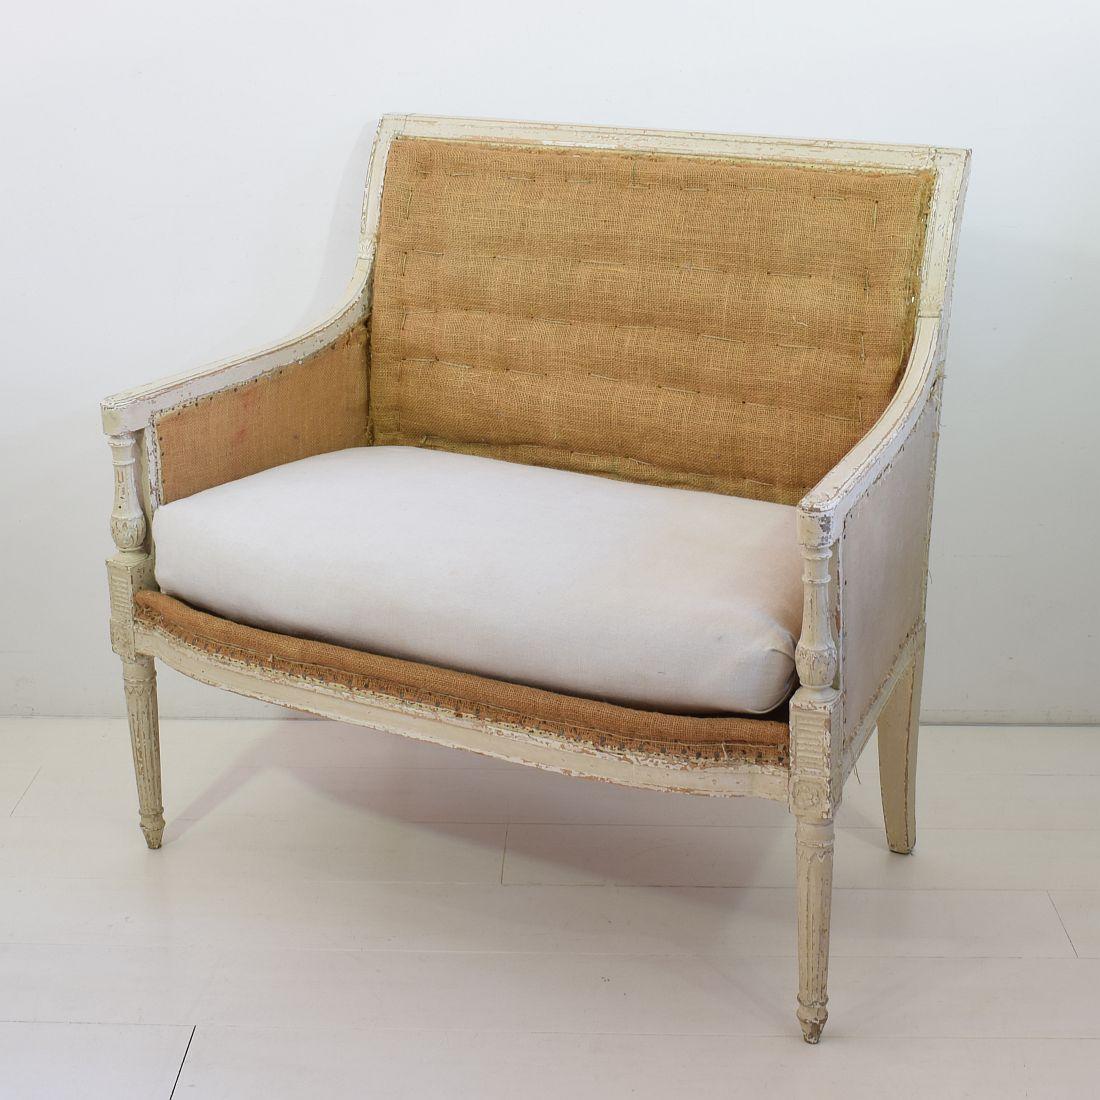 Beautiful French Directoire marquise with besides the directoire also some Louis XVI style influences visible. Very rare period piece.
France, late 18th century.
Weathered, small losses 
This piece of furniture is despite of its high age in a